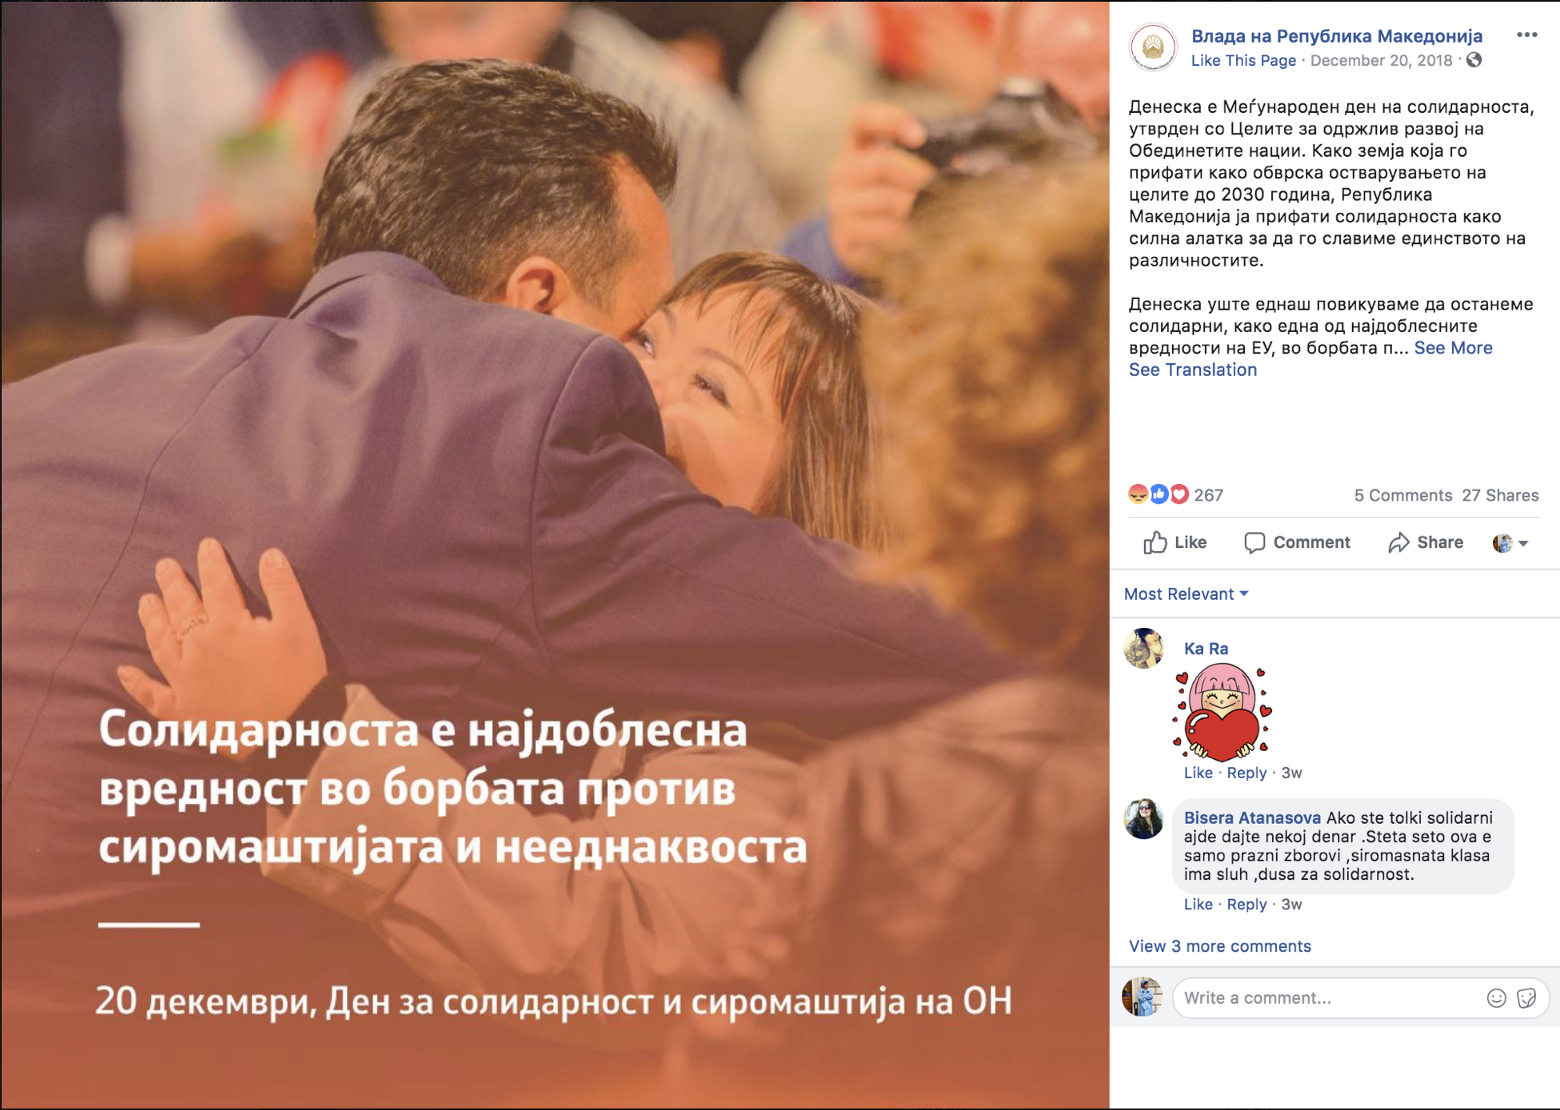 Coordinated Comments in Macedonia